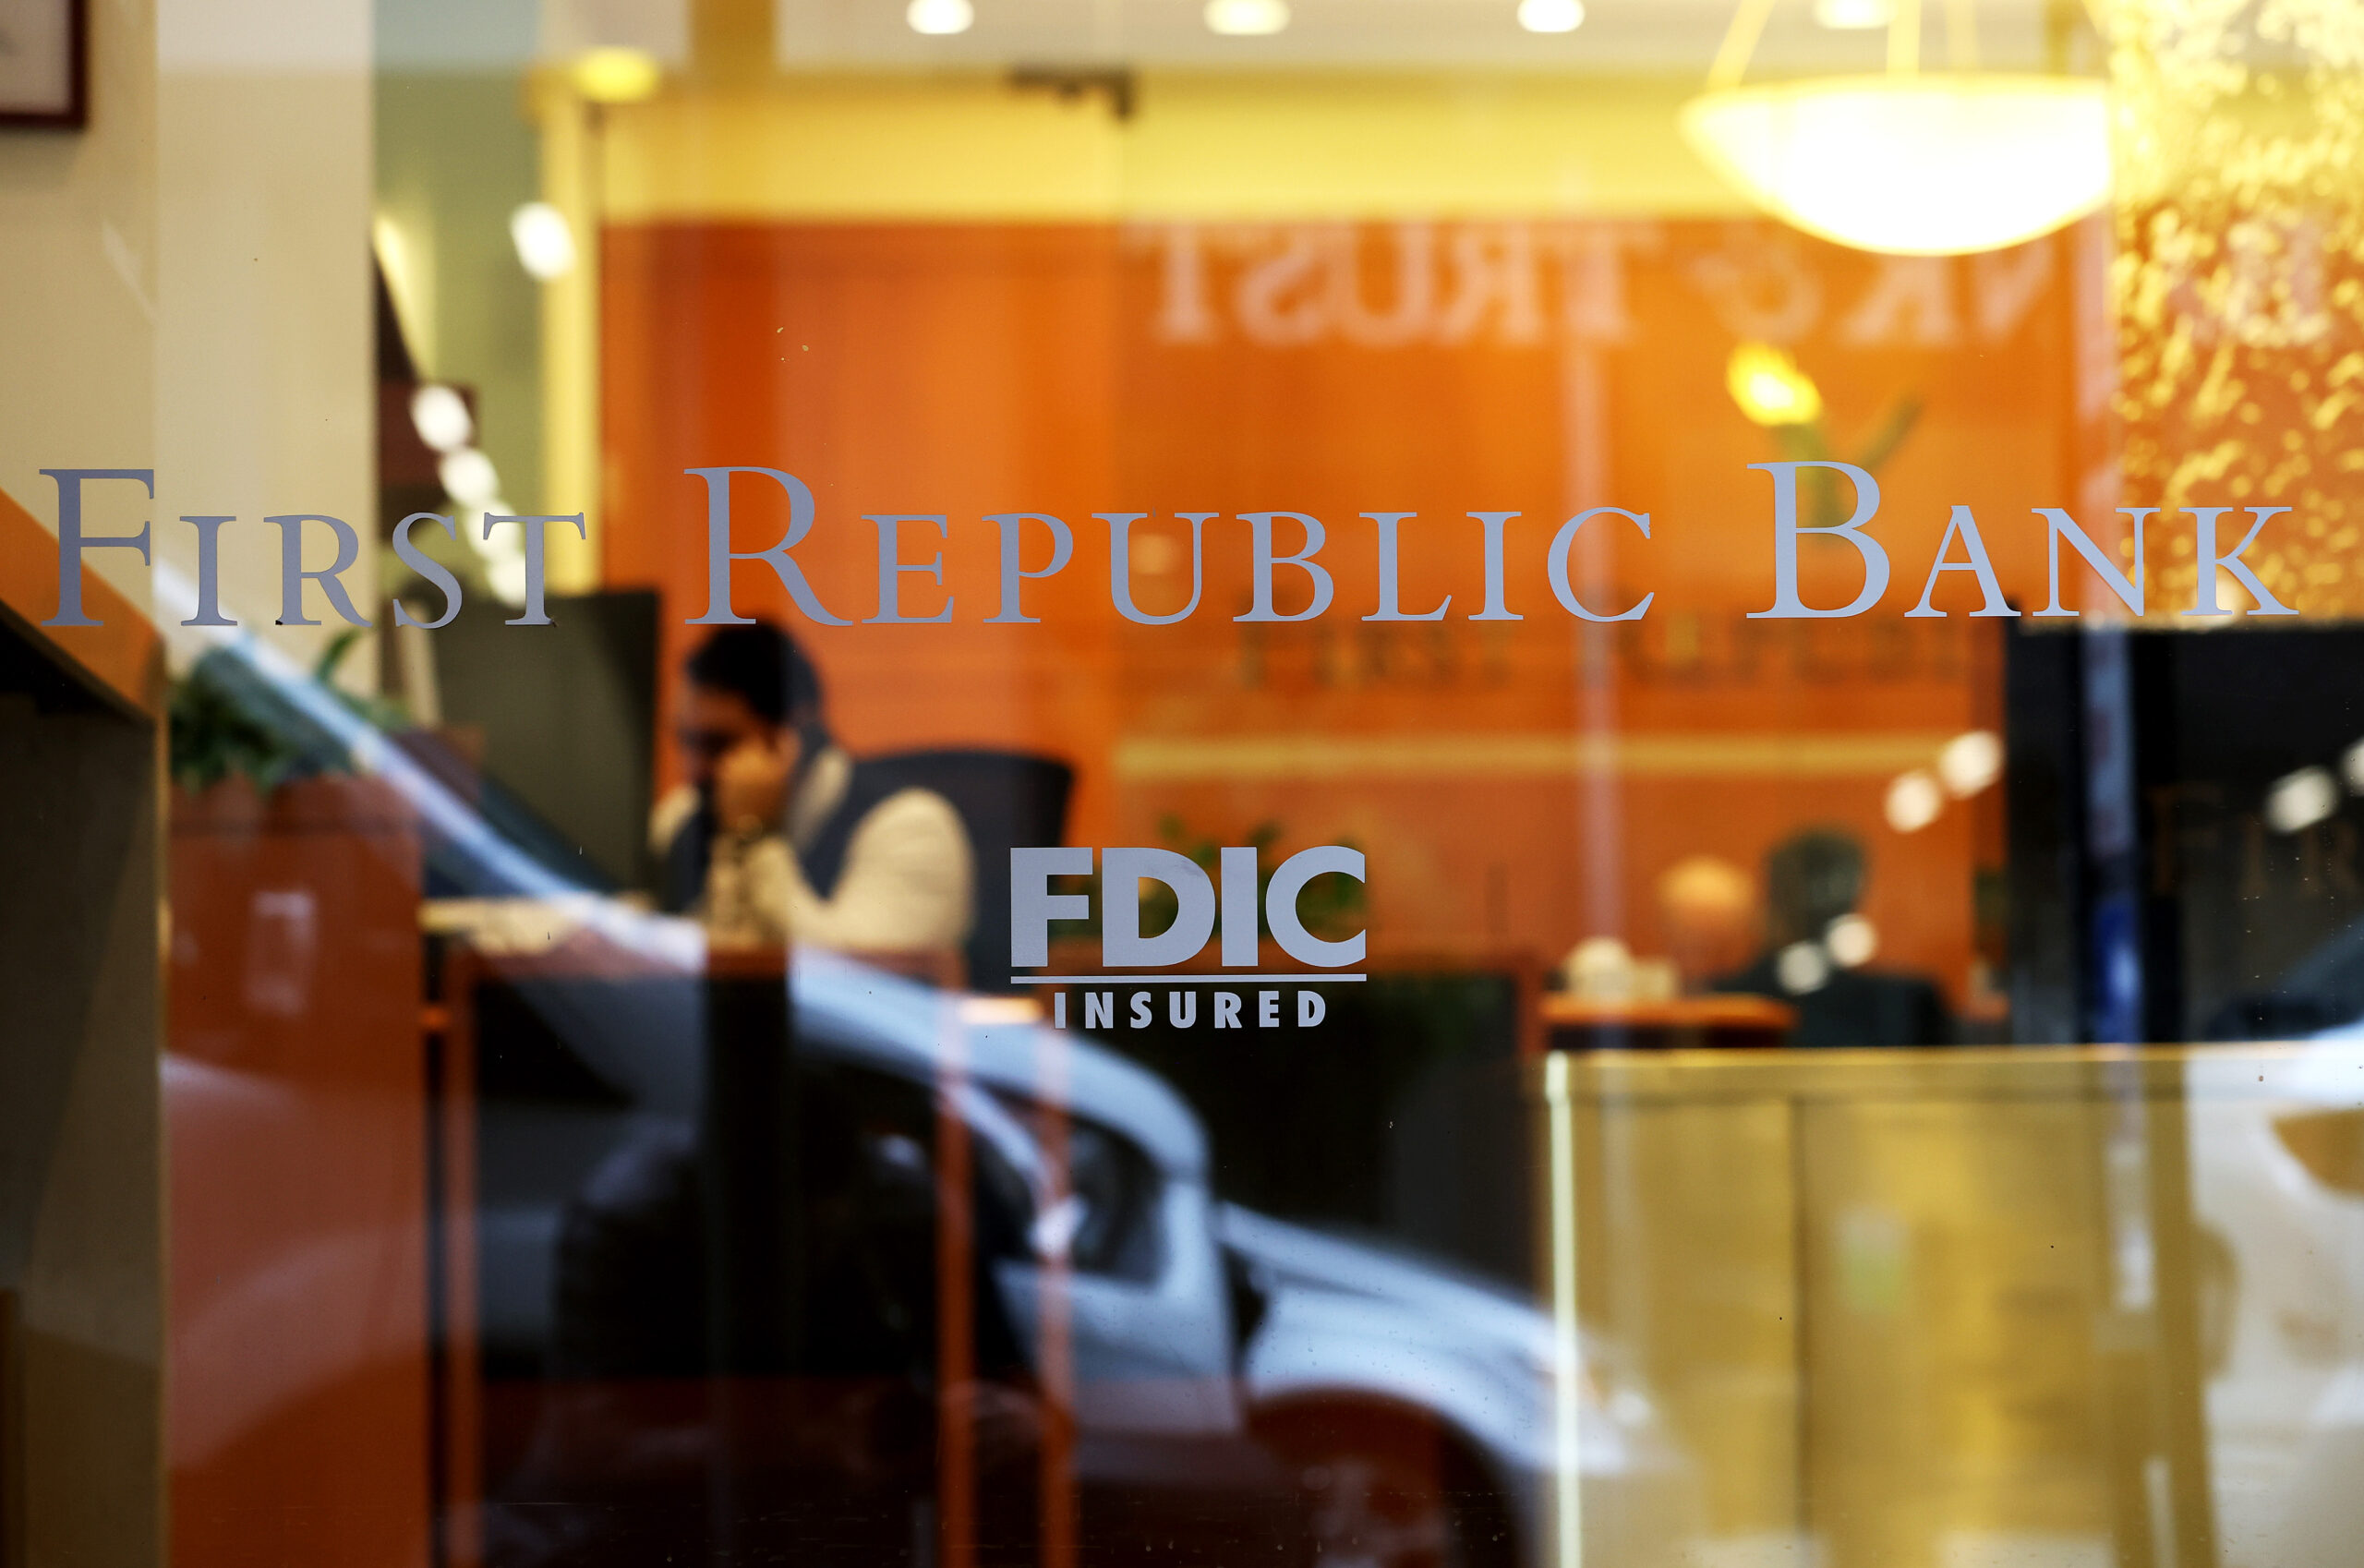 ‘Cutthroat’: First Republic Bank Employees Laid Off in Brief, Scripted Calls